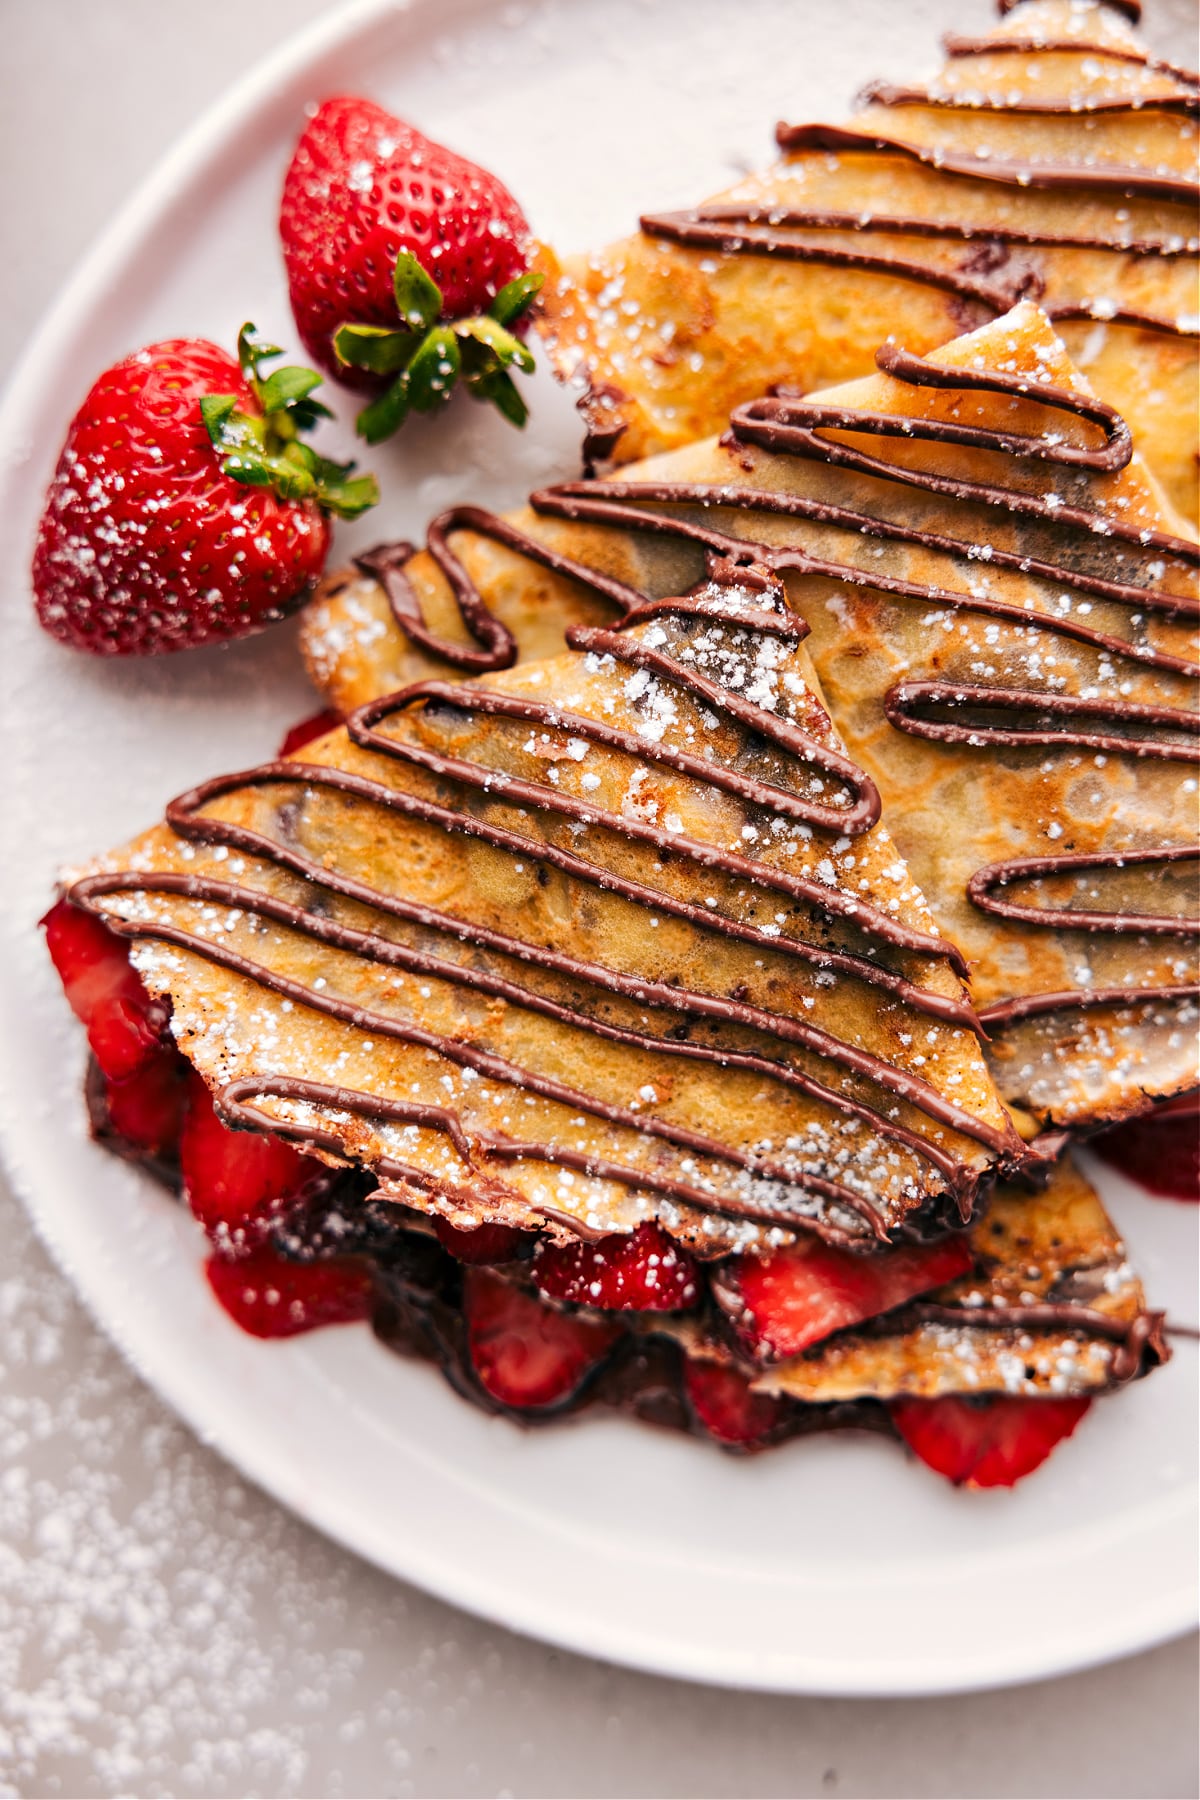 Chocolate and Strawberry Crepes Recipe 